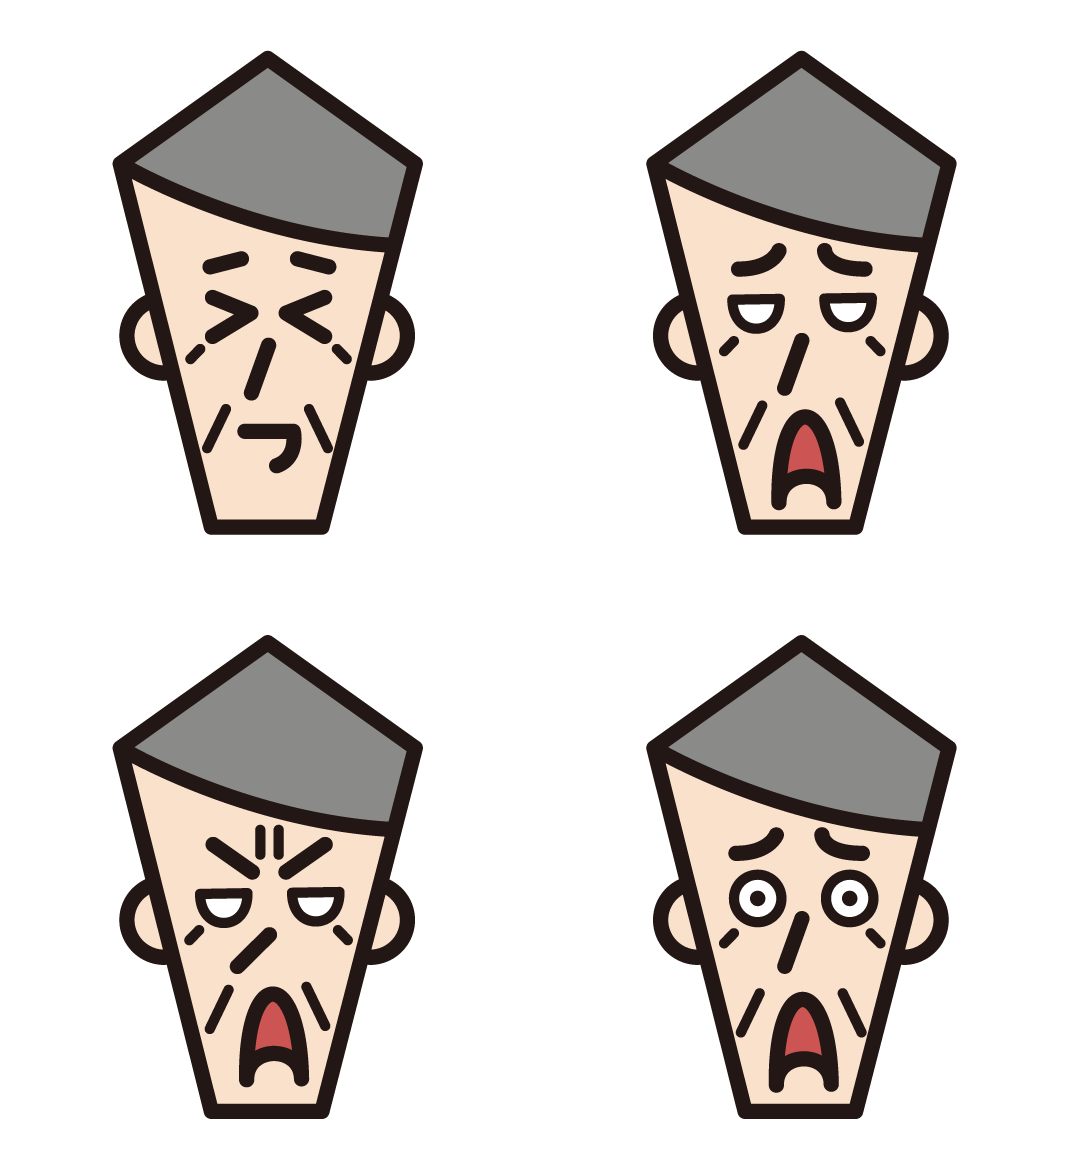 2 illustrations of the various expressions of the old man